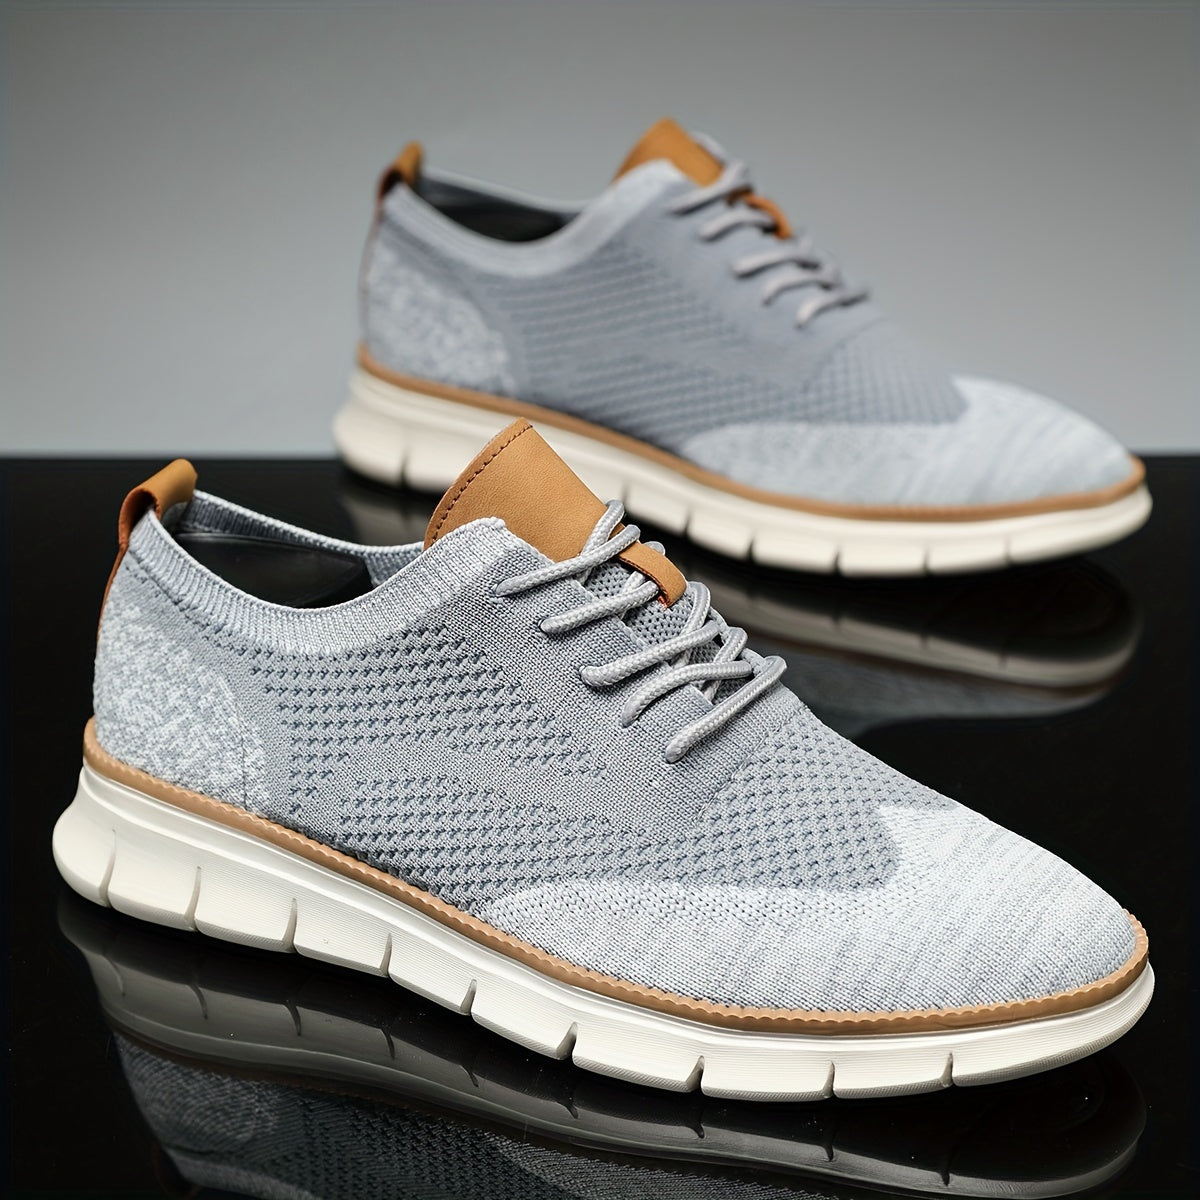 Men's Woven Knit Breathable Sneakers